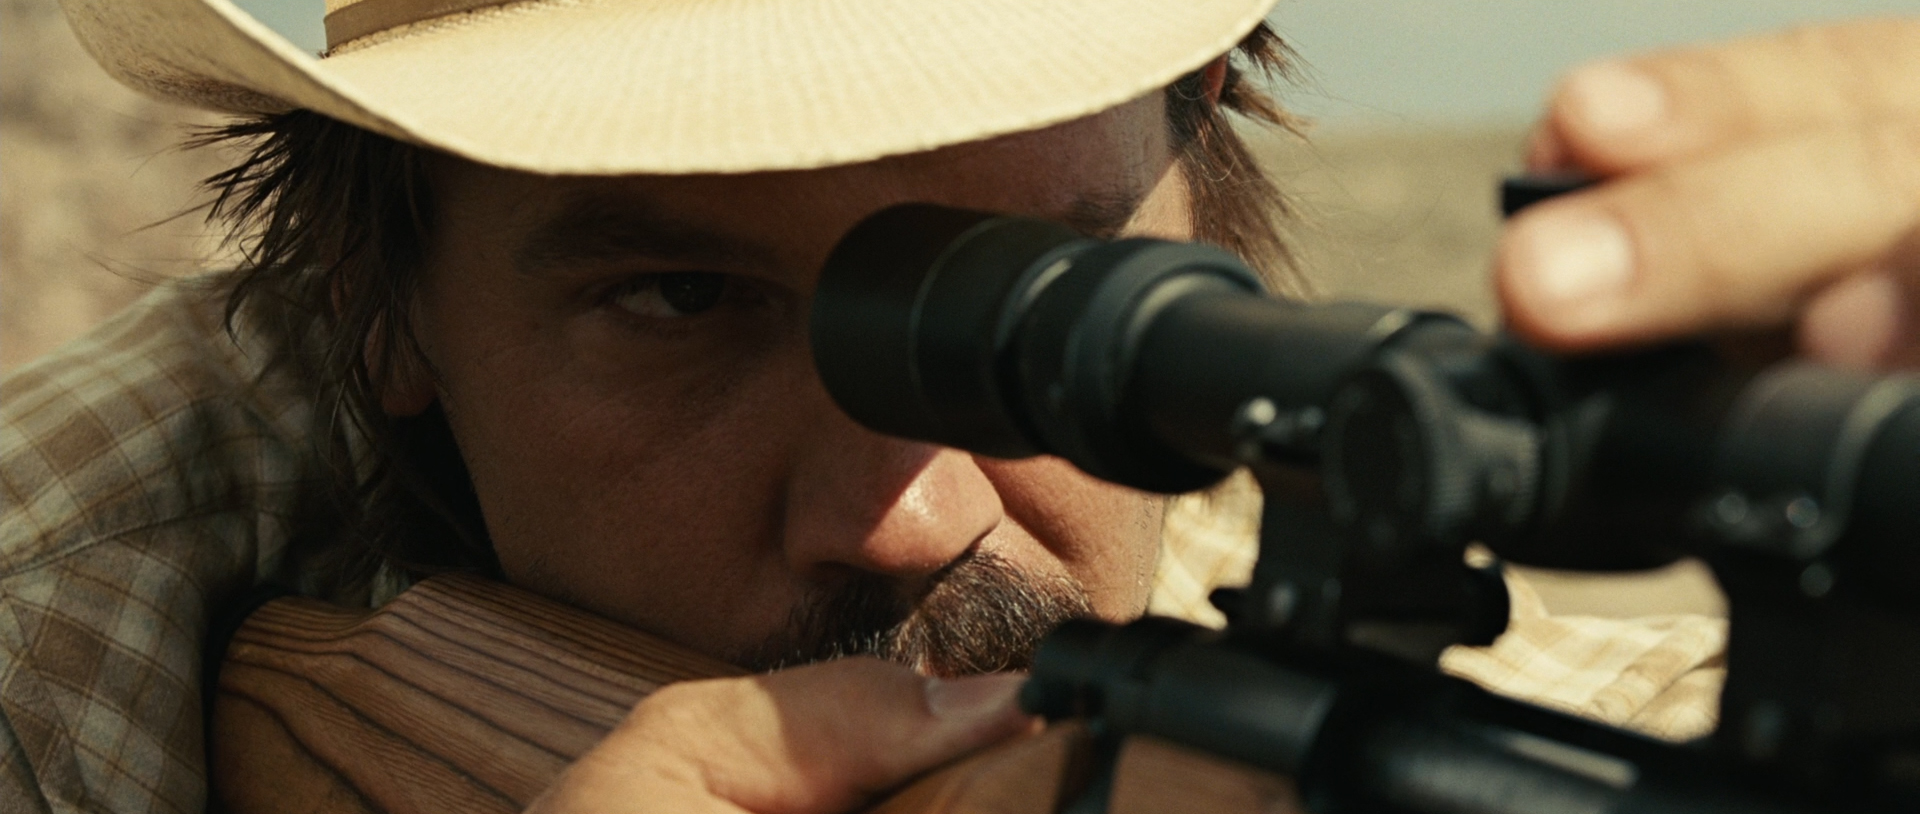 Llewelyn aims down the scope of his rifle.